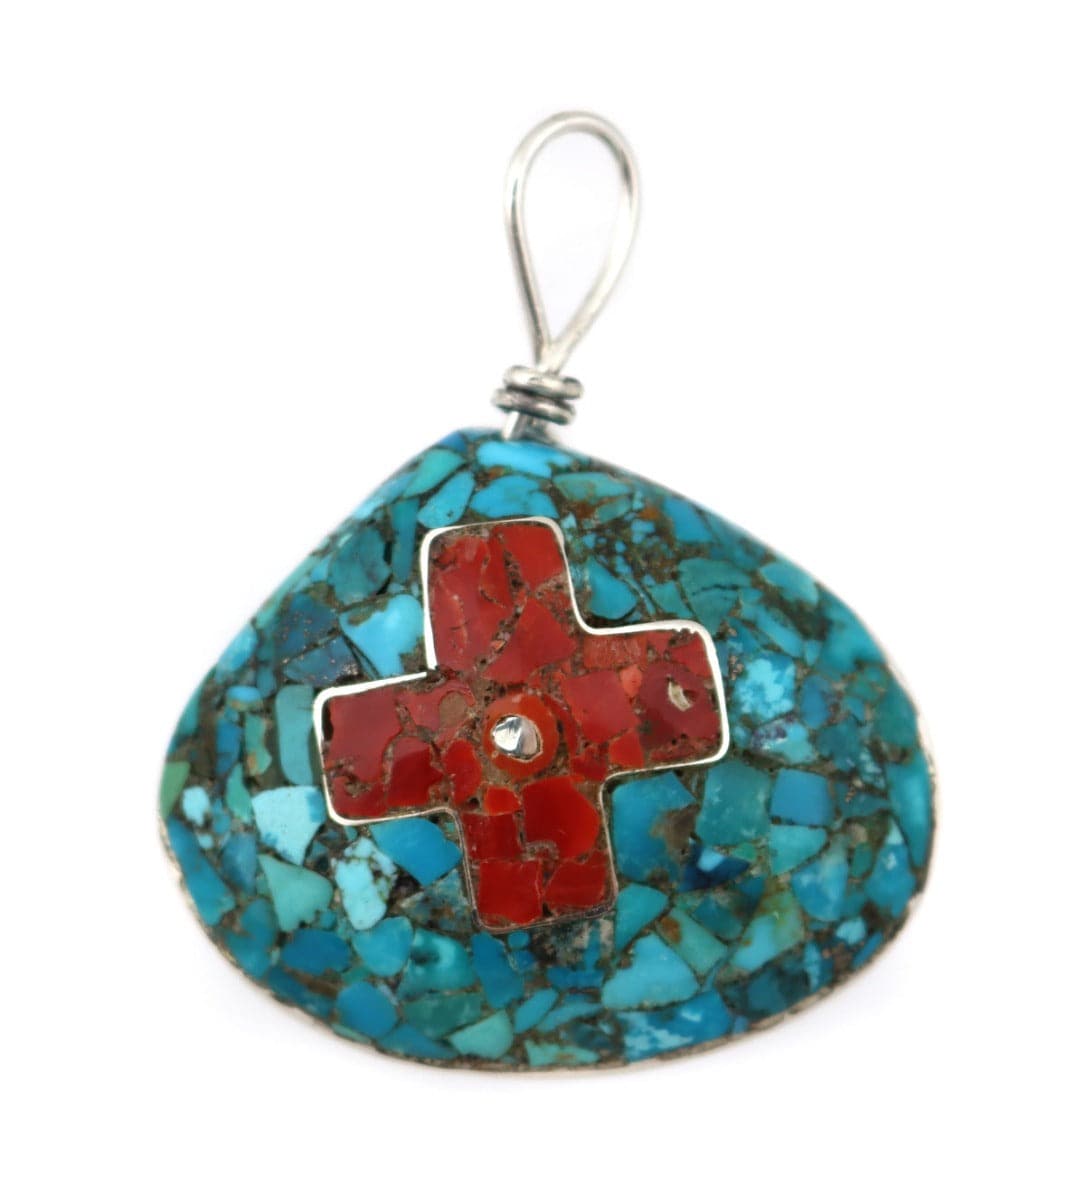 Mary Lovato - Santo Domingo (Kewa) Turquoise and Coral Mosaic Inlay and Silver Shell Pendant with Cross Design, 2.75" x 1.875" (J14251)